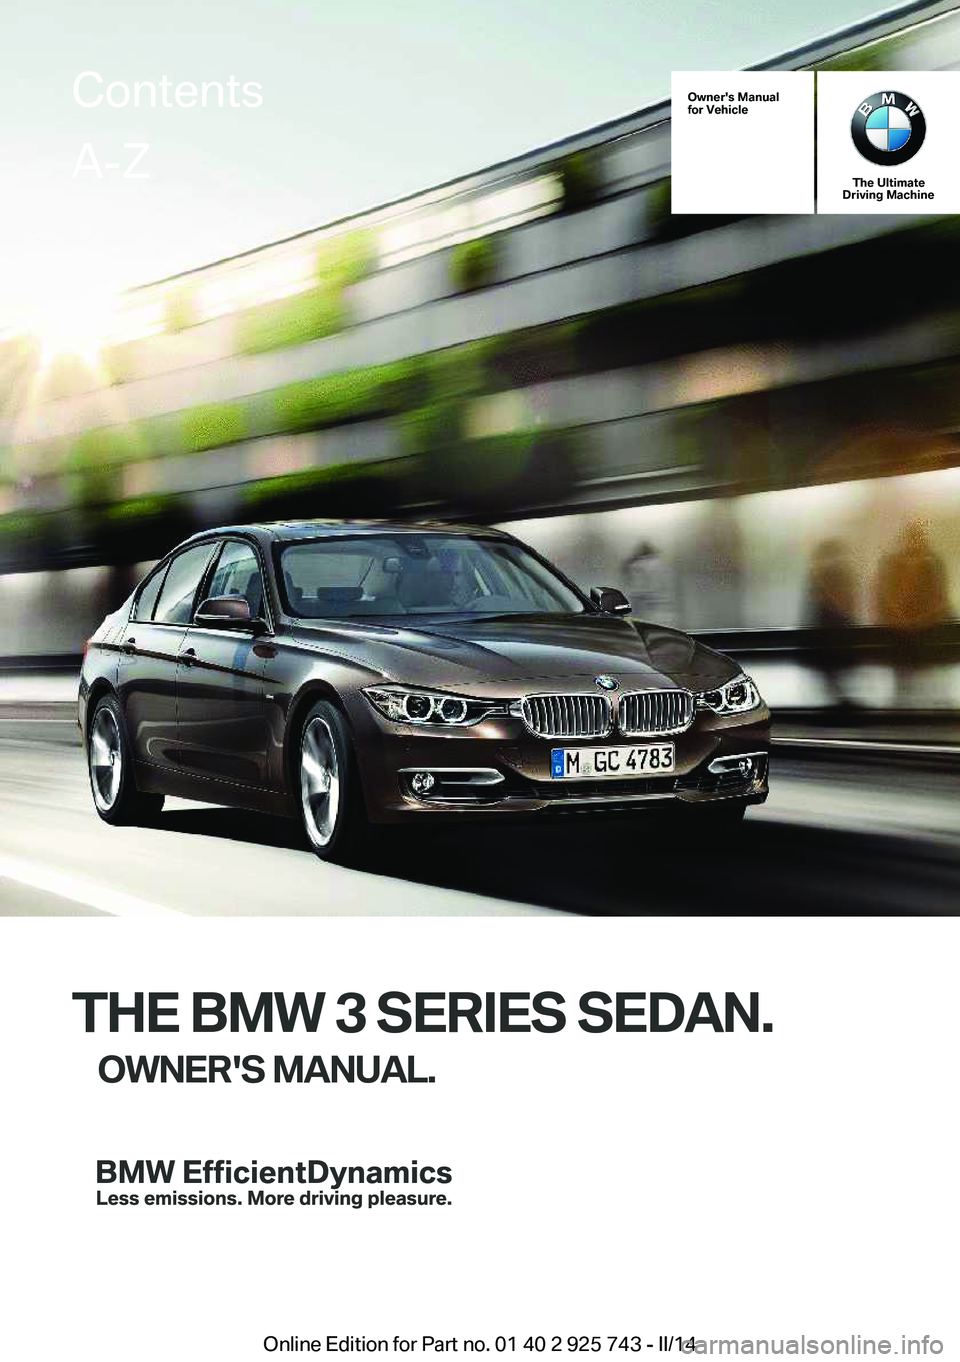 BMW 320I 2014  Owners Manual Owner's Manual
for Vehicle
The Ultimate
Driving Machine
THE BMW 3 SERIES SEDAN.
OWNER'S MANUAL.
ContentsA-Z
Online Edition for Part no. 01 40 2 925 743 - II/14   